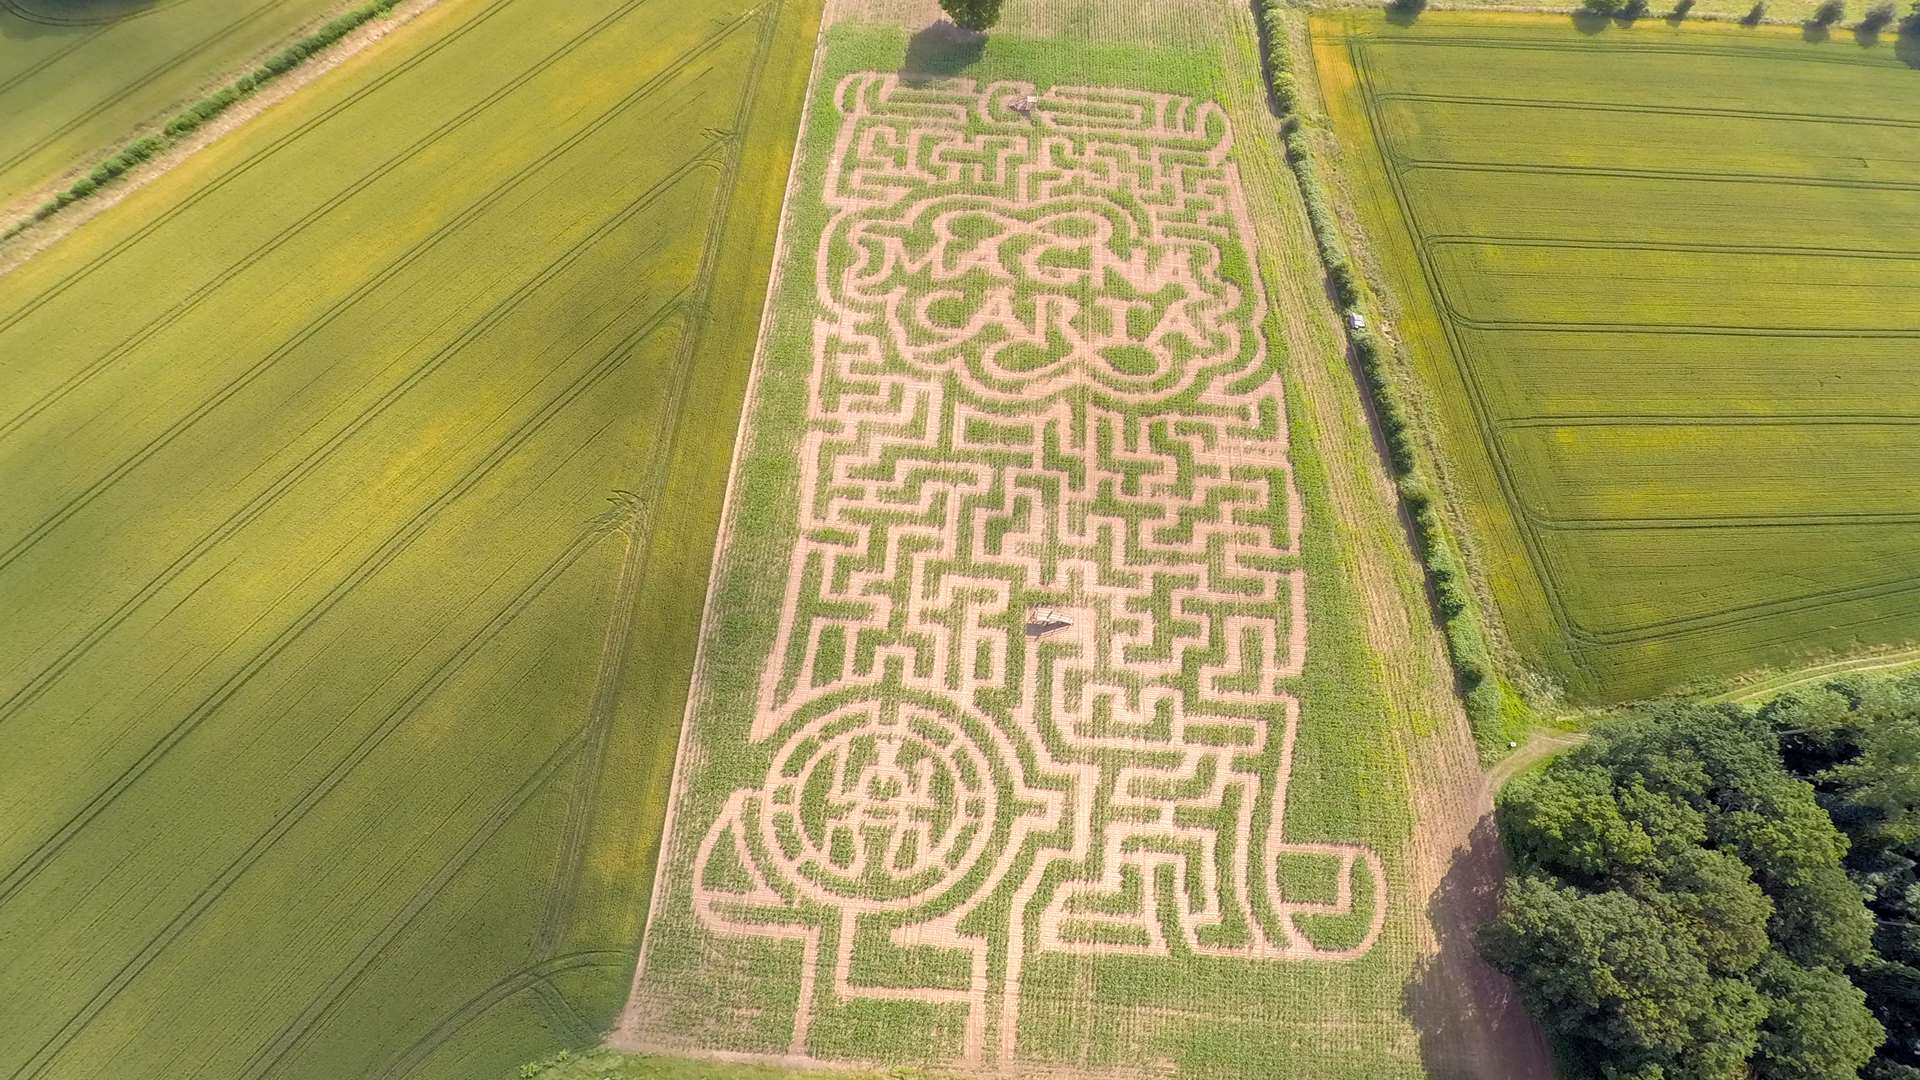 This year's Maize Maze at Penshurst Place